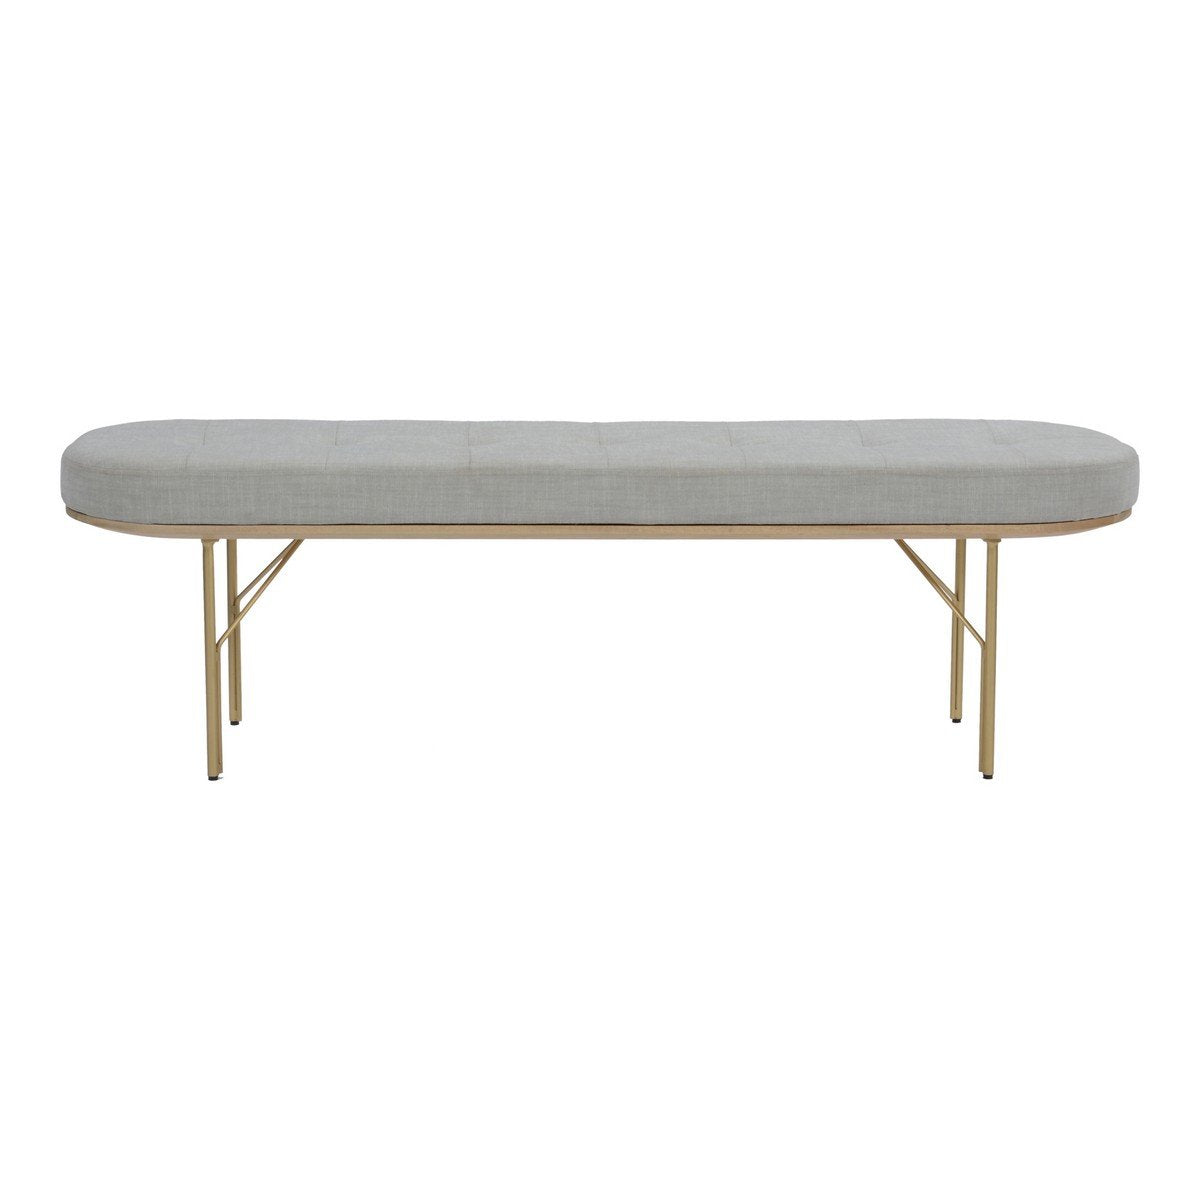 Moe's Home Collection Raja Bench - BZ-1092-29 - Moe's Home Collection - Benches - Minimal And Modern - 1